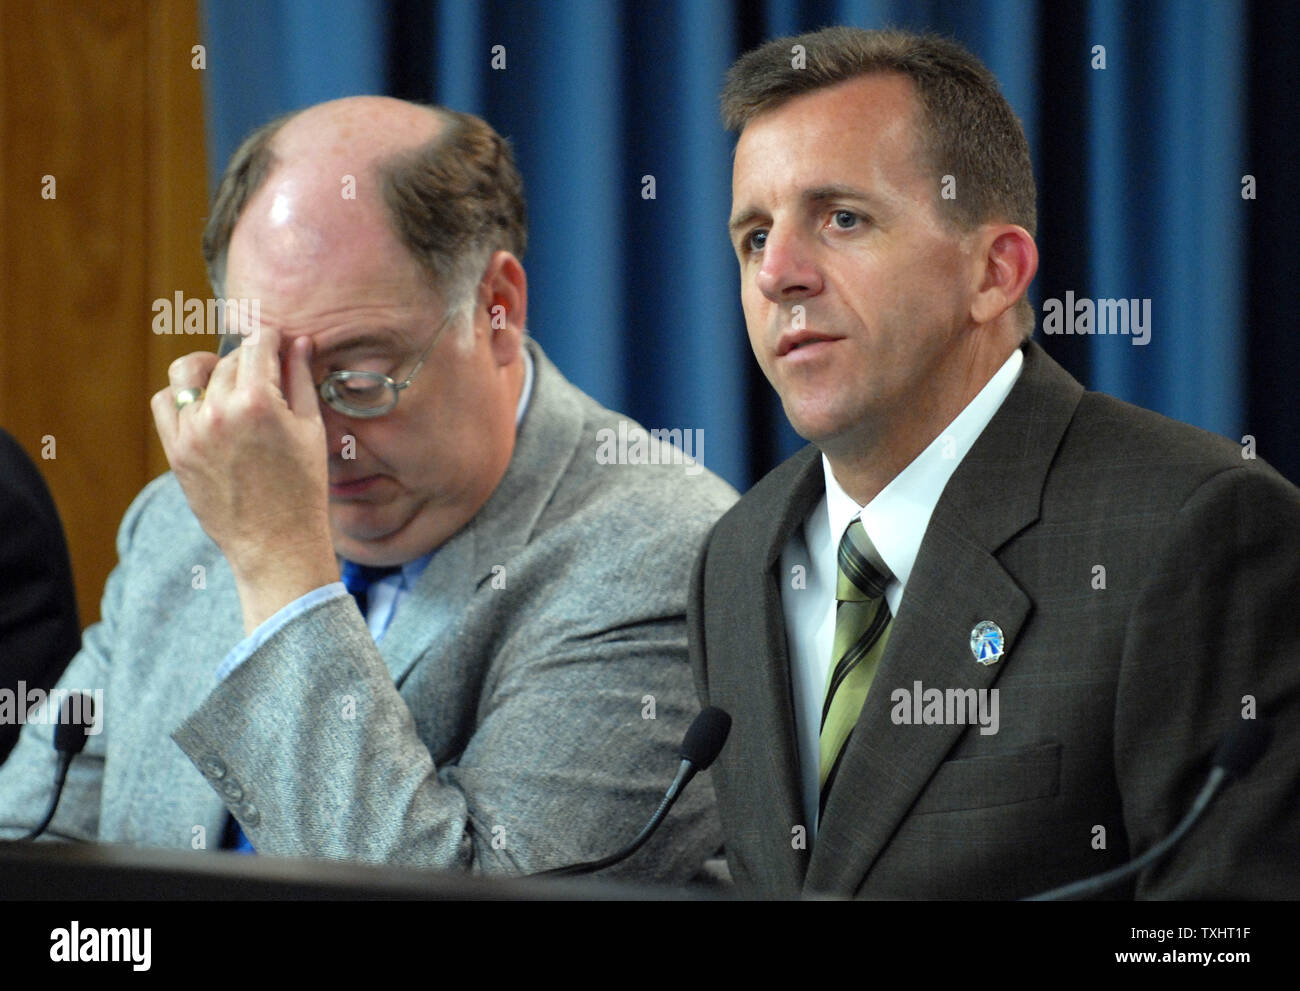 Shuttle Program Manager Wayne Hale  (L) and LeRoy Cain, chairman of the Mission Management Team, participates in a NASA briefing to discuss the problem with a fuel sensor which delayed the launch of Space Shuttle Atlantis at Kennedy Space Center in Florida on September 8, 2006. Atlantis' mission STS-115, a construction mission to the International Space Station, is delayed 24 hours while NASA considers the problem.    (UPI Photo/Roger L. Wollenberg) Stock Photo